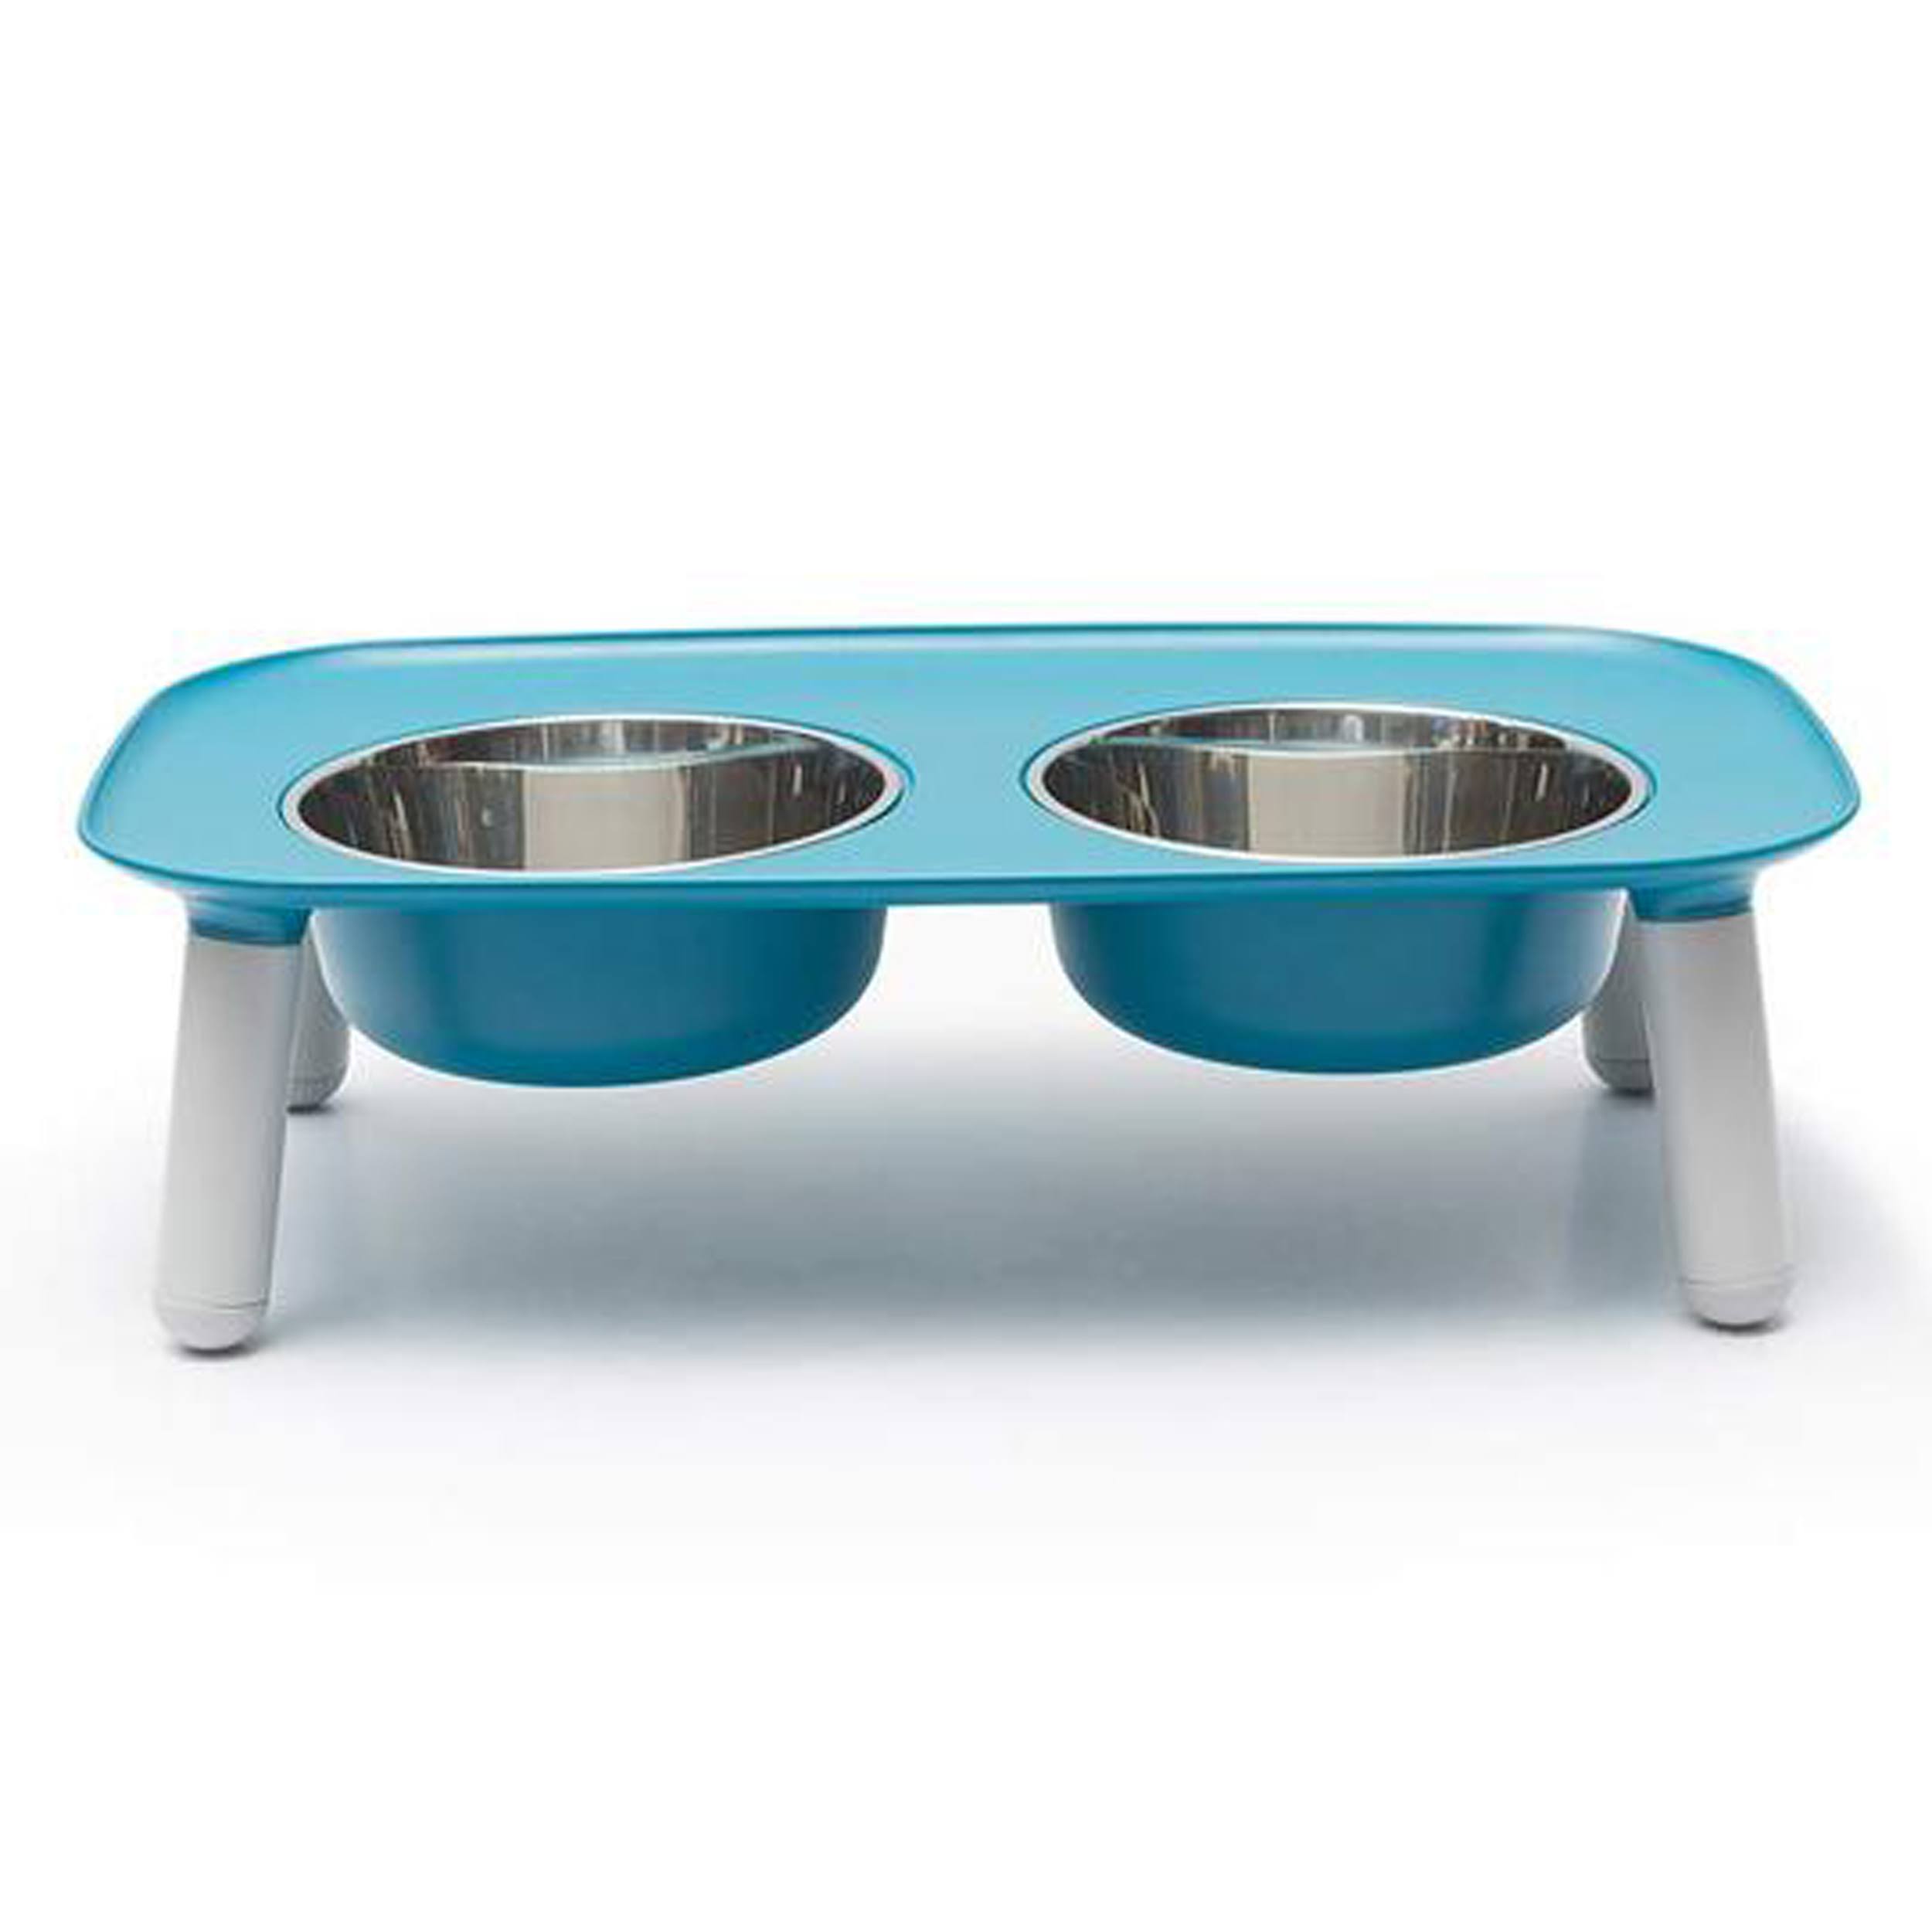 Messy Mutts Elevated Double Dog Feeder - with Removable Stainless